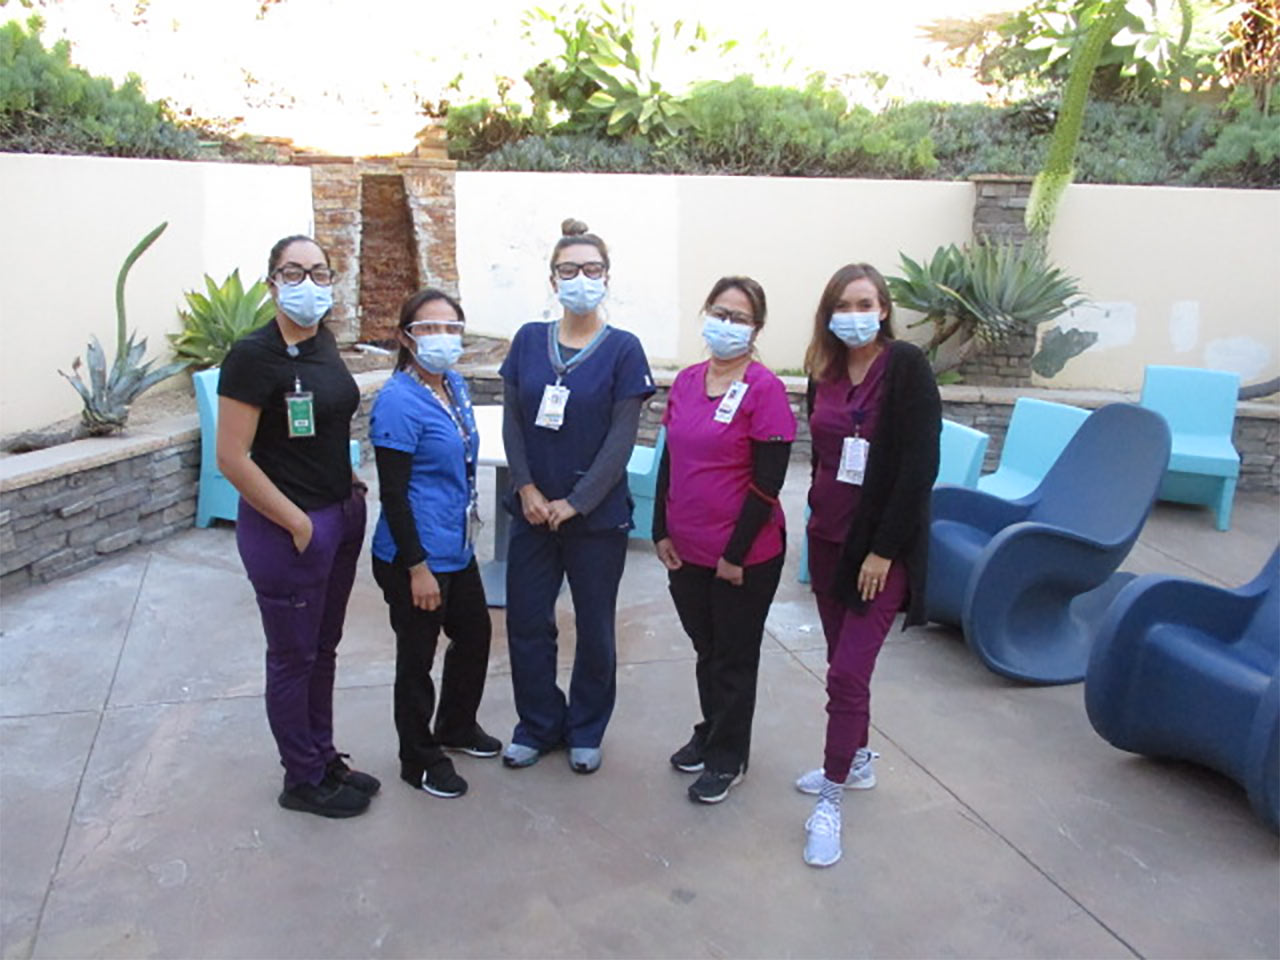 Thanks to the Sharp Mesa Vista Hospital  staff for donating to the homeless.